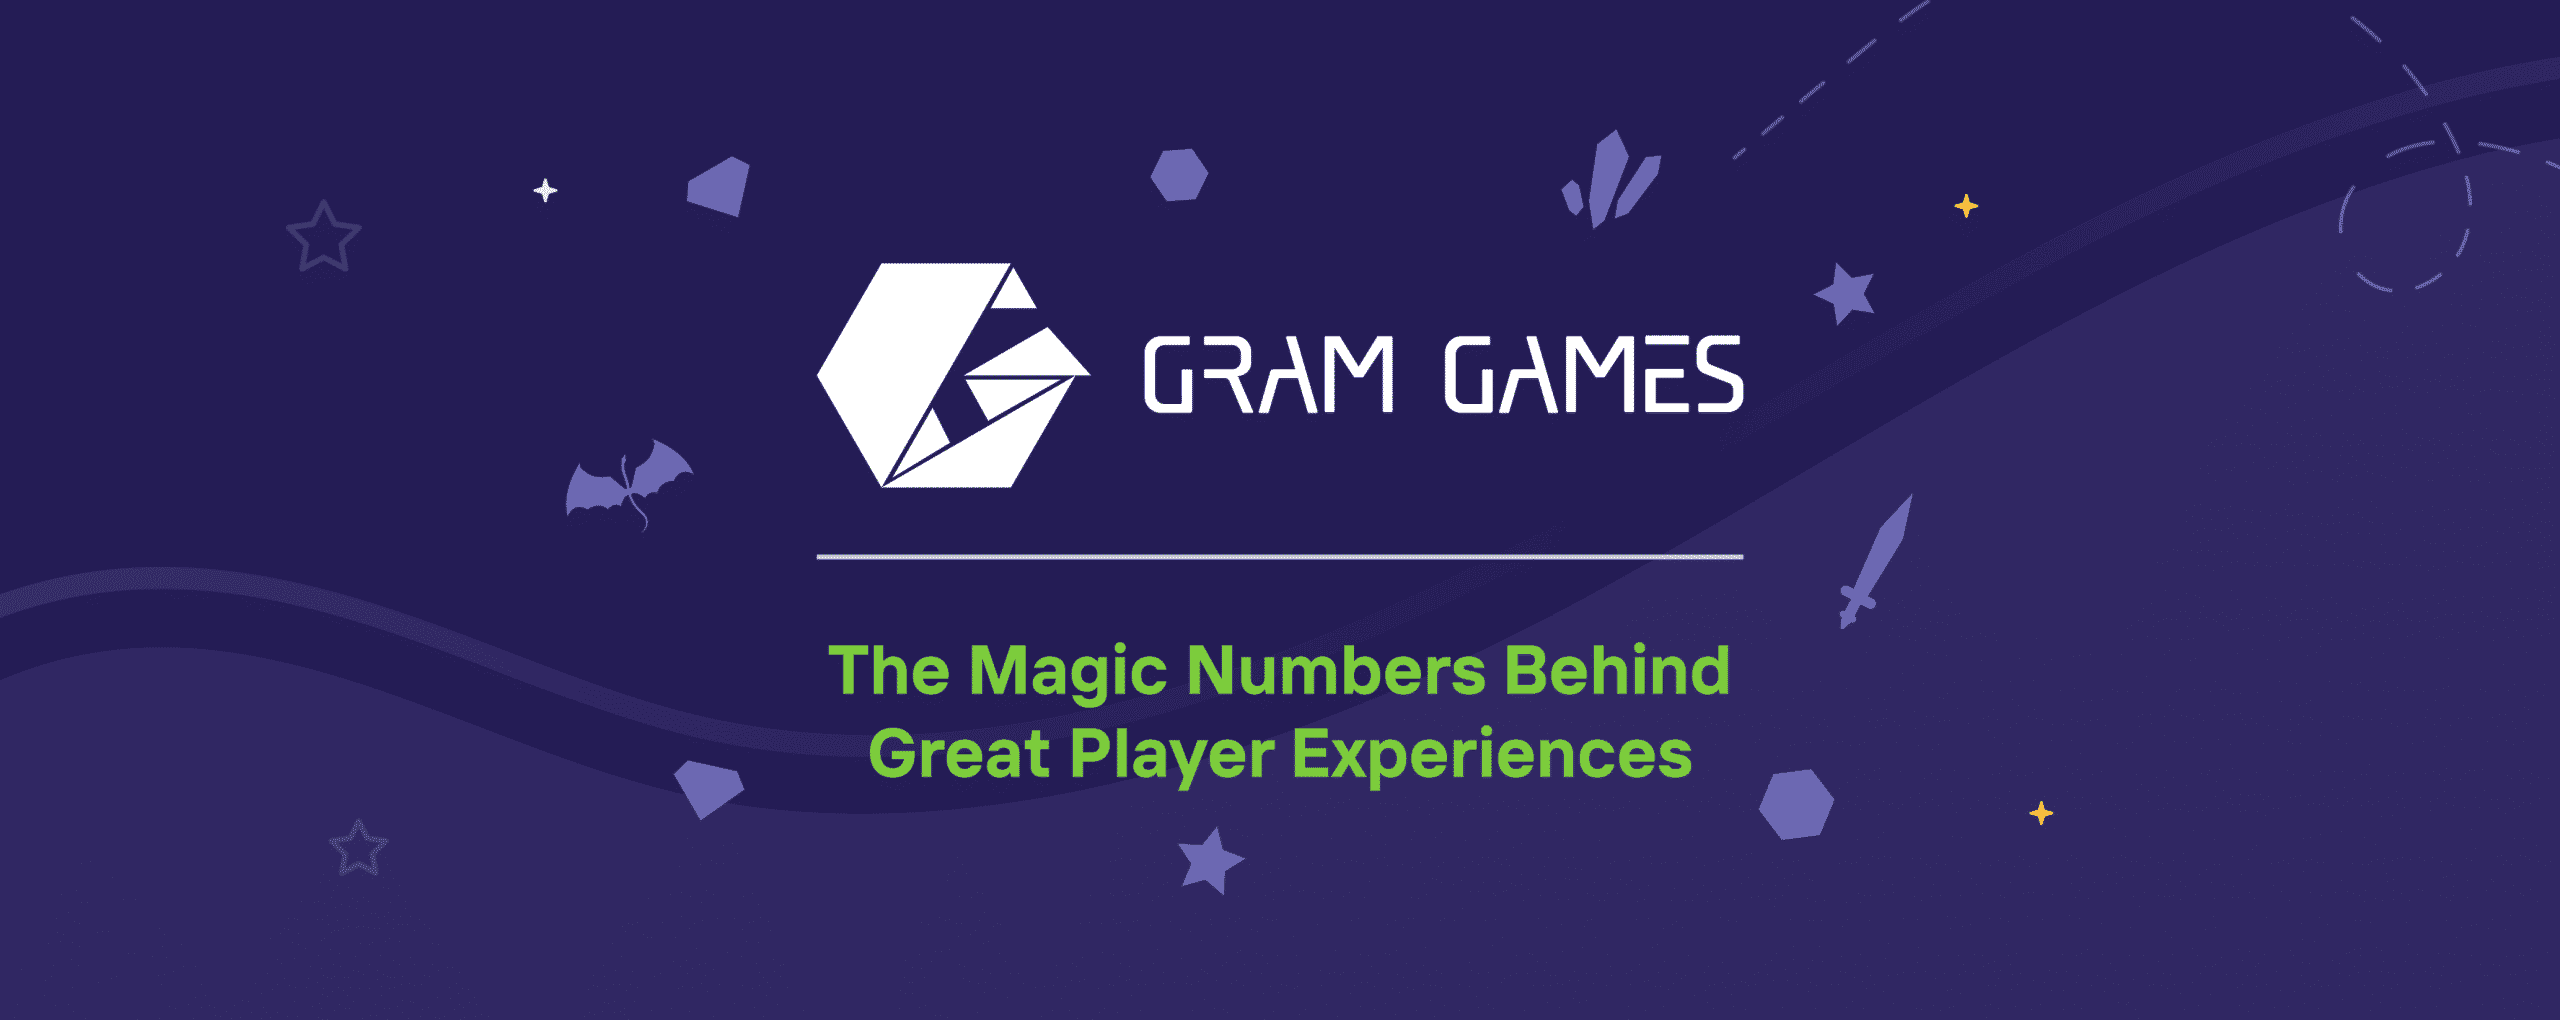 “The Magic Numbers Behind Great Player Experiences” Recap